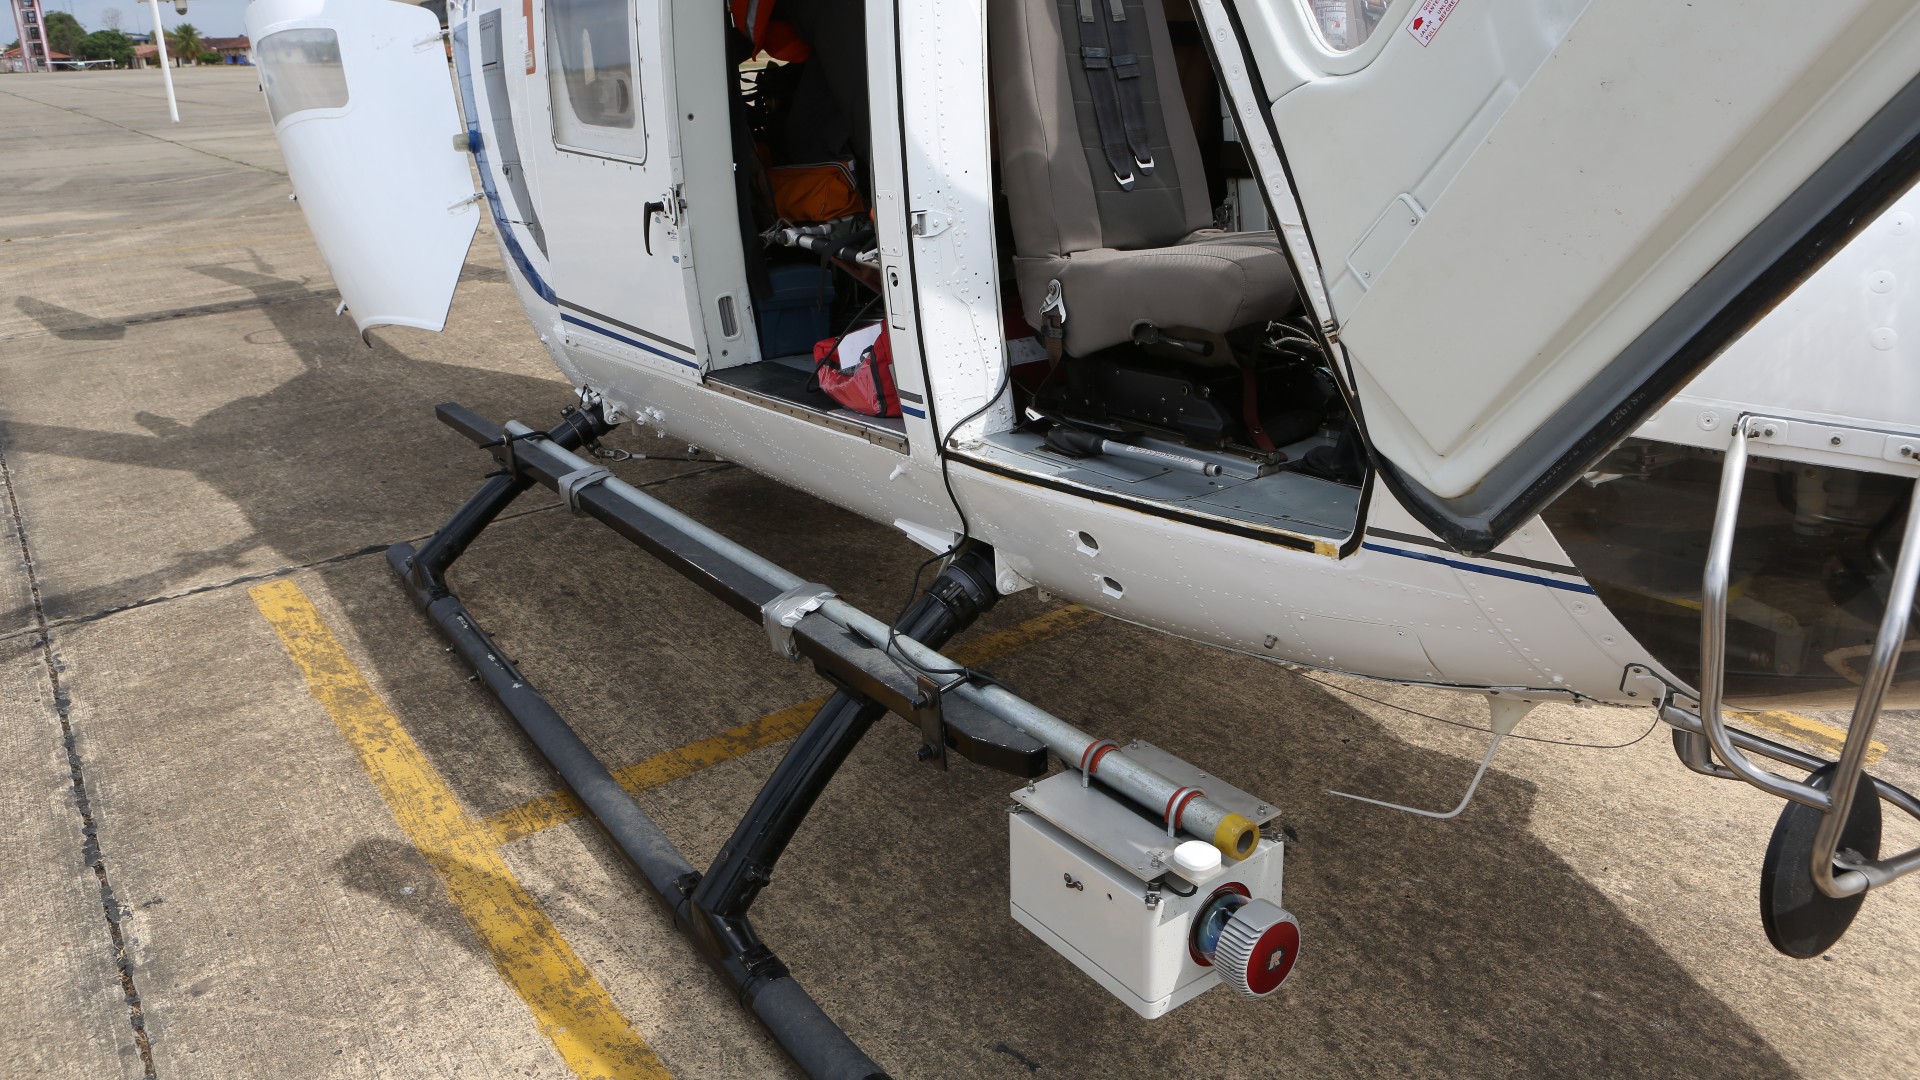 Trimble Apx-15 Uav With Gnss Riegl Vux-1 Scanner Attached To A Eurocopter As350 Helicopter.